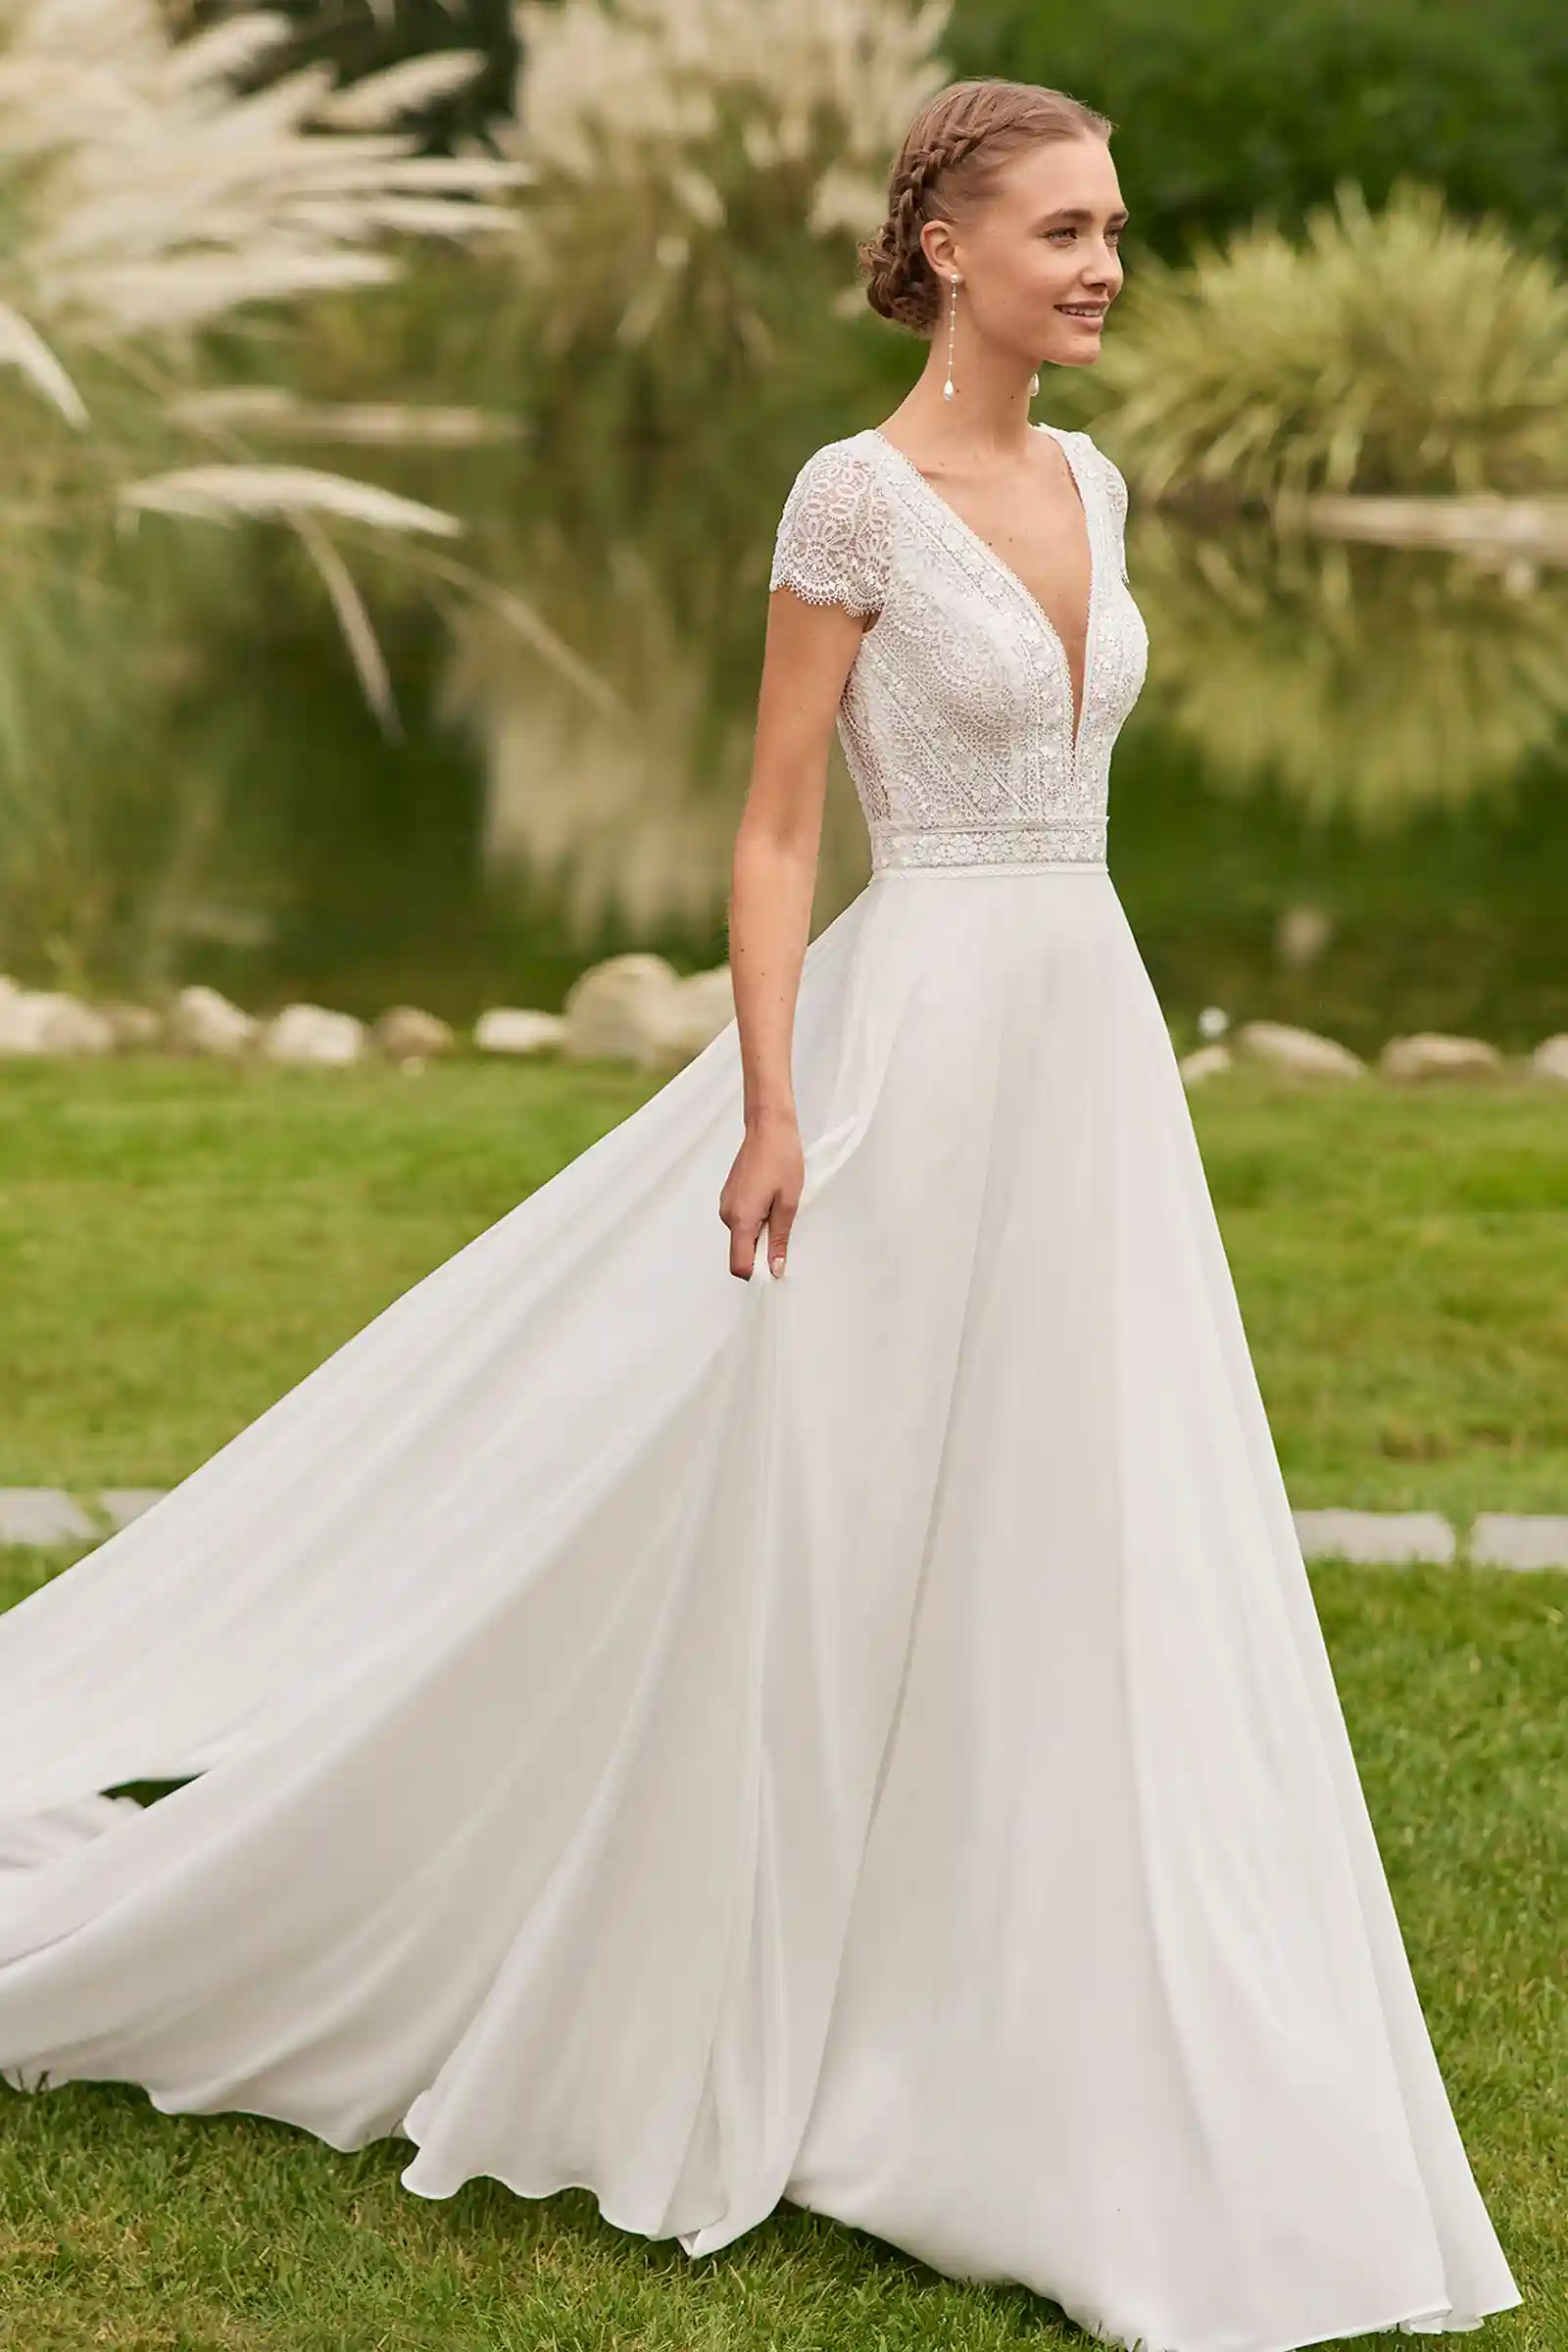 Featured image for “Brautkleid Ray”